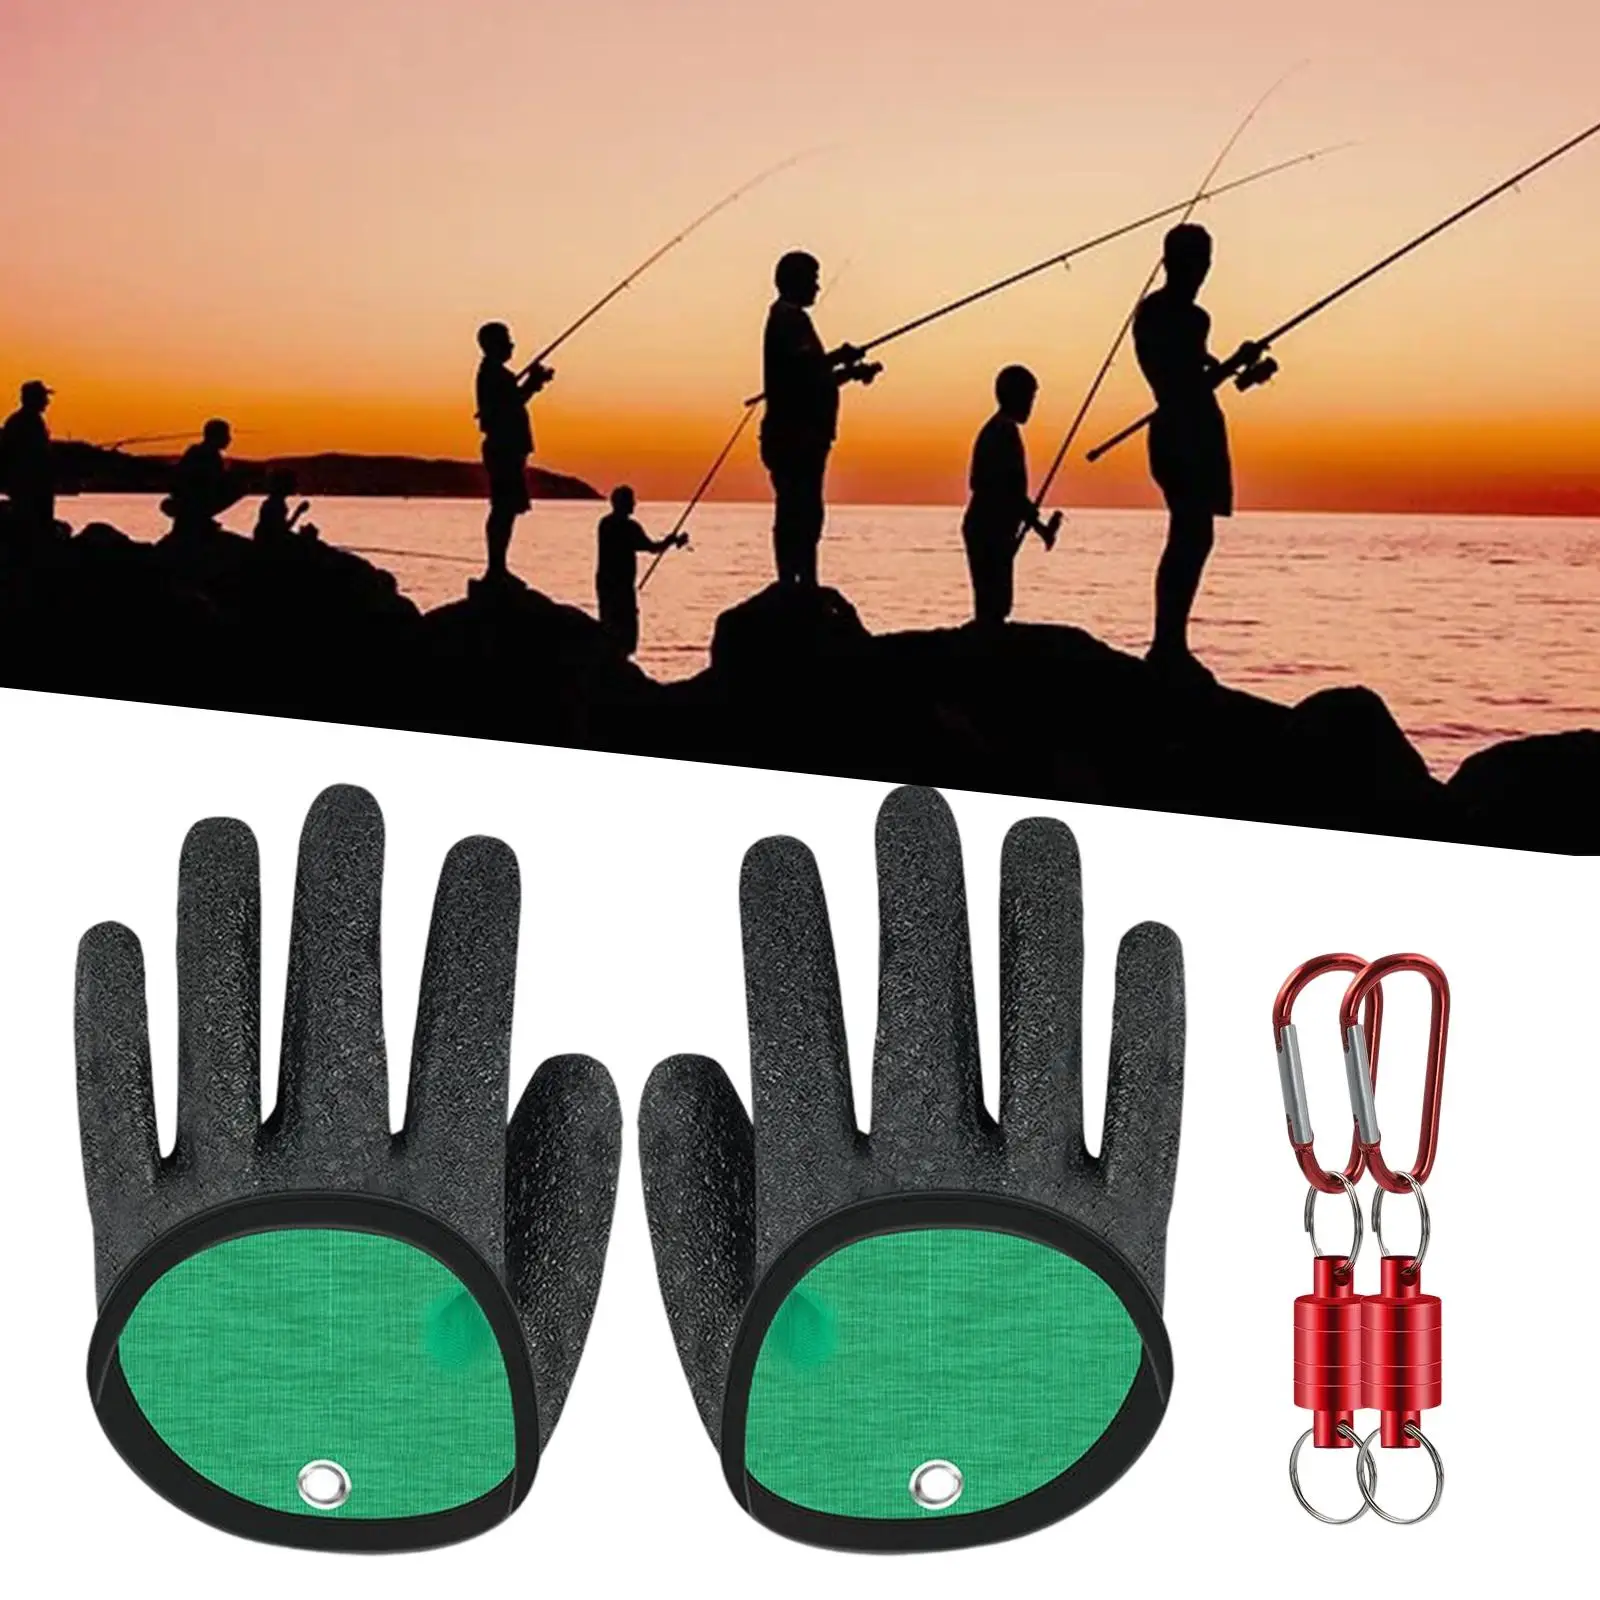 Professional Fishing Gloves Full Finger Waterproof Cut Resistant Catch Fish